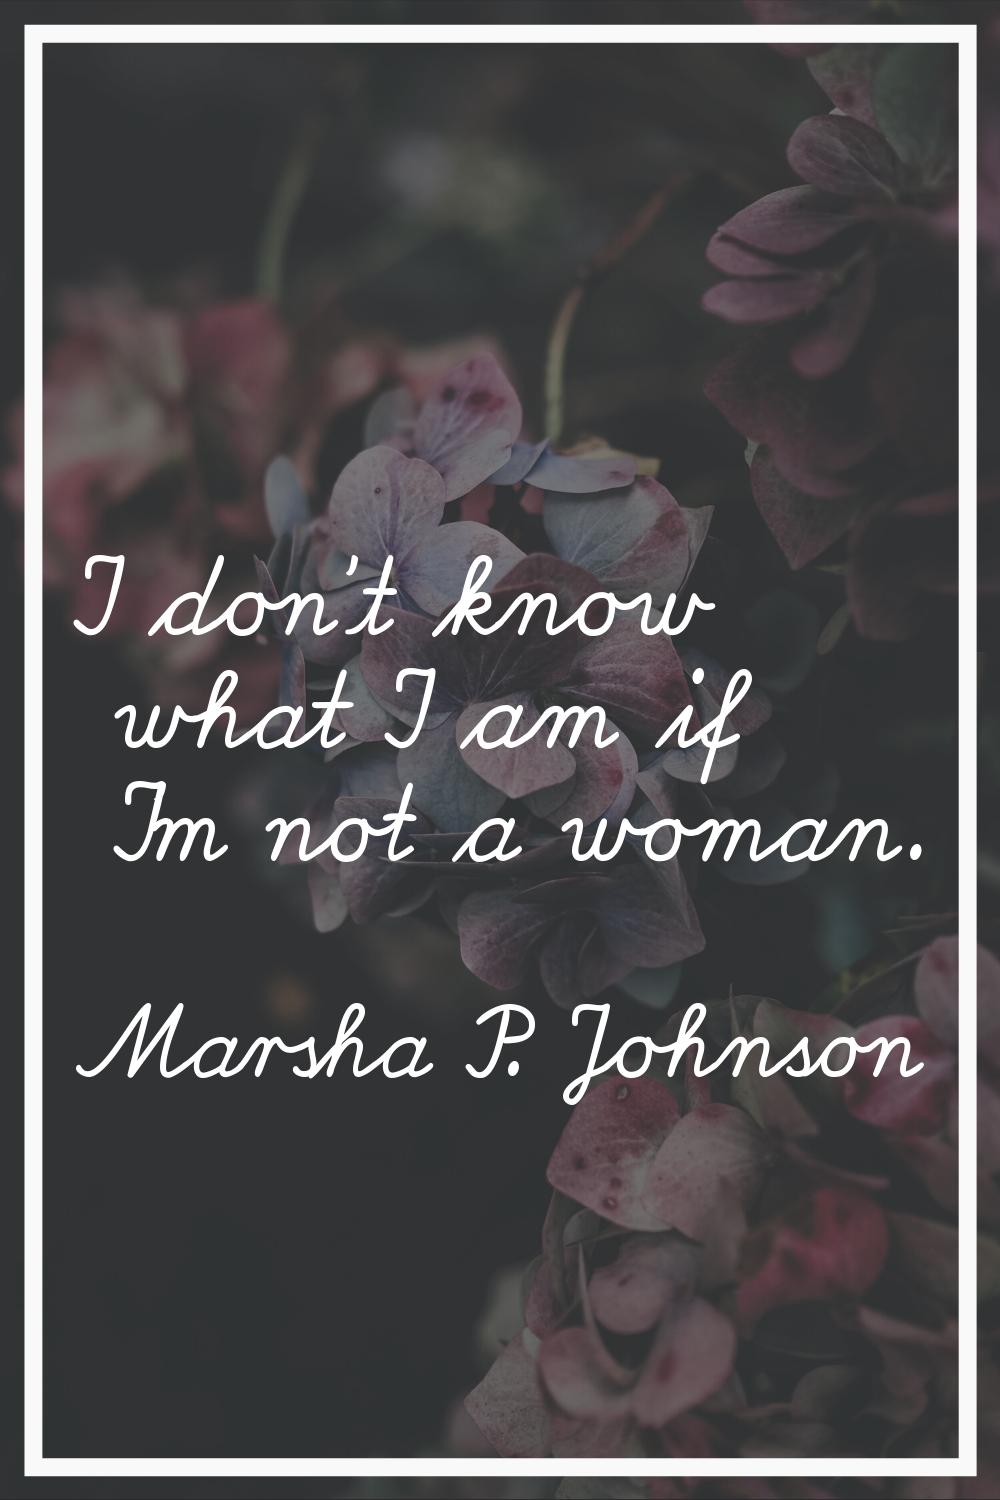 I don't know what I am if I'm not a woman.